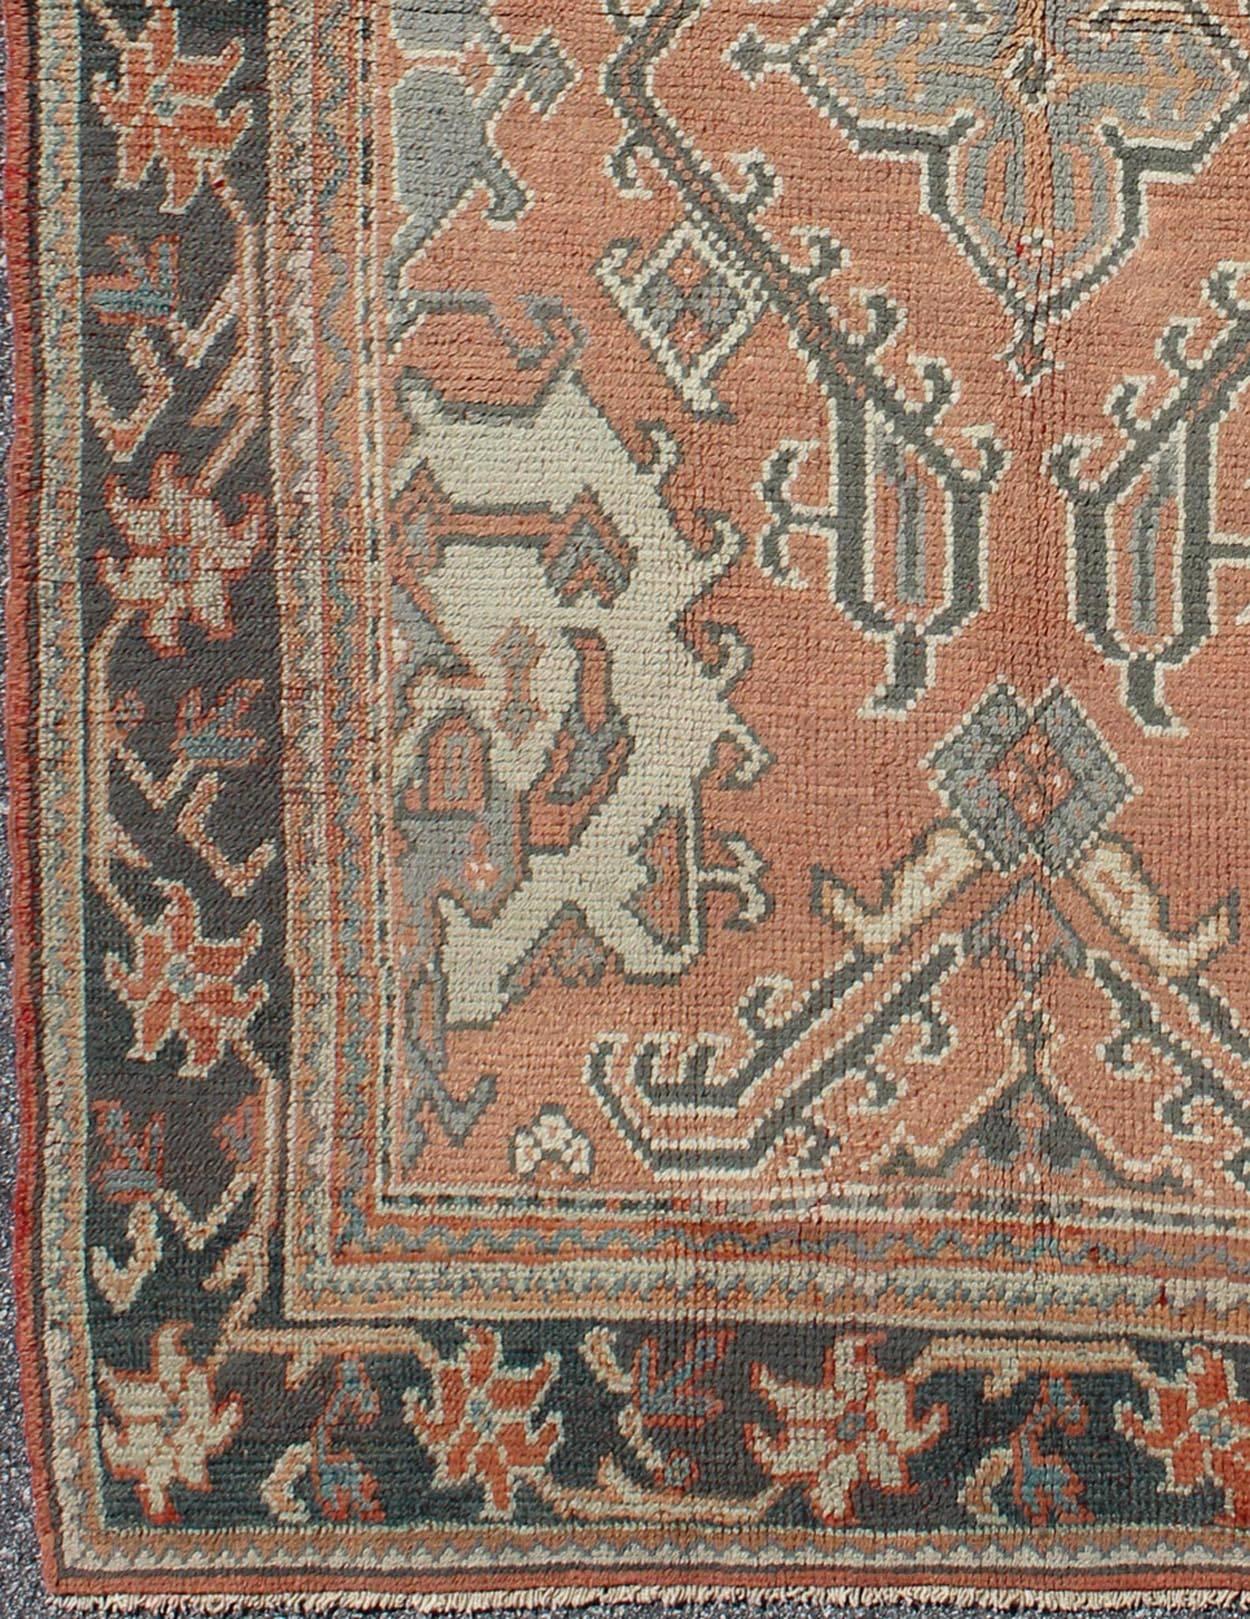  Early 20th Century Antique Turkish Oushak Rug. Antique Oushak Rug from Turkey with Central Medallion and Sub-Geometric Elements   rug/F-0912


This antique Turkish Oushak carpet features a central medallion design, as well as patterns of smaller